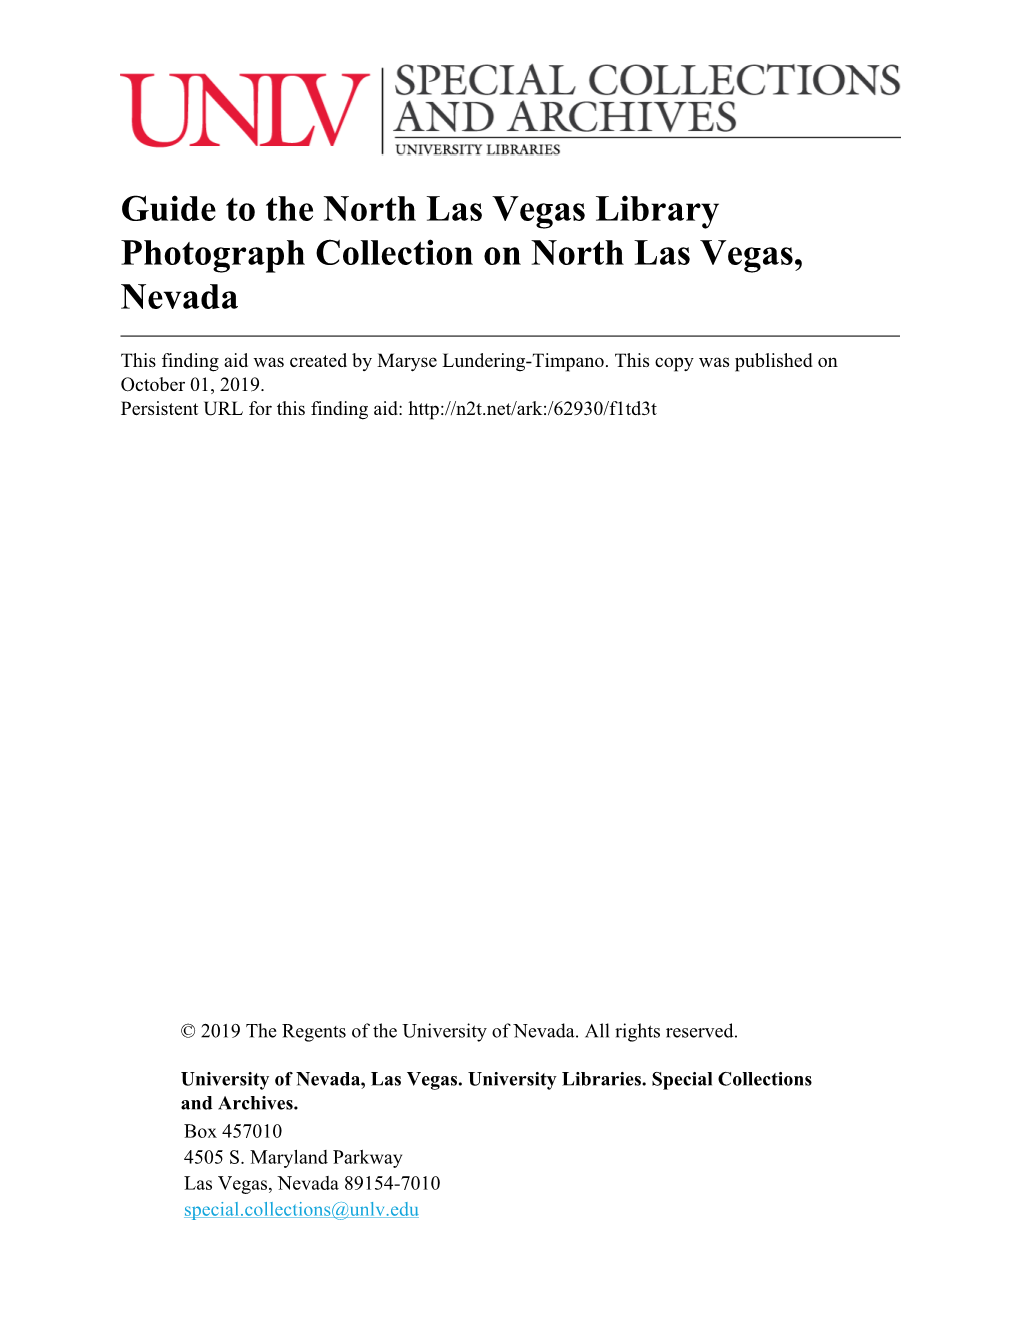 Guide to the North Las Vegas Library Photograph Collection on North Las Vegas, Nevada